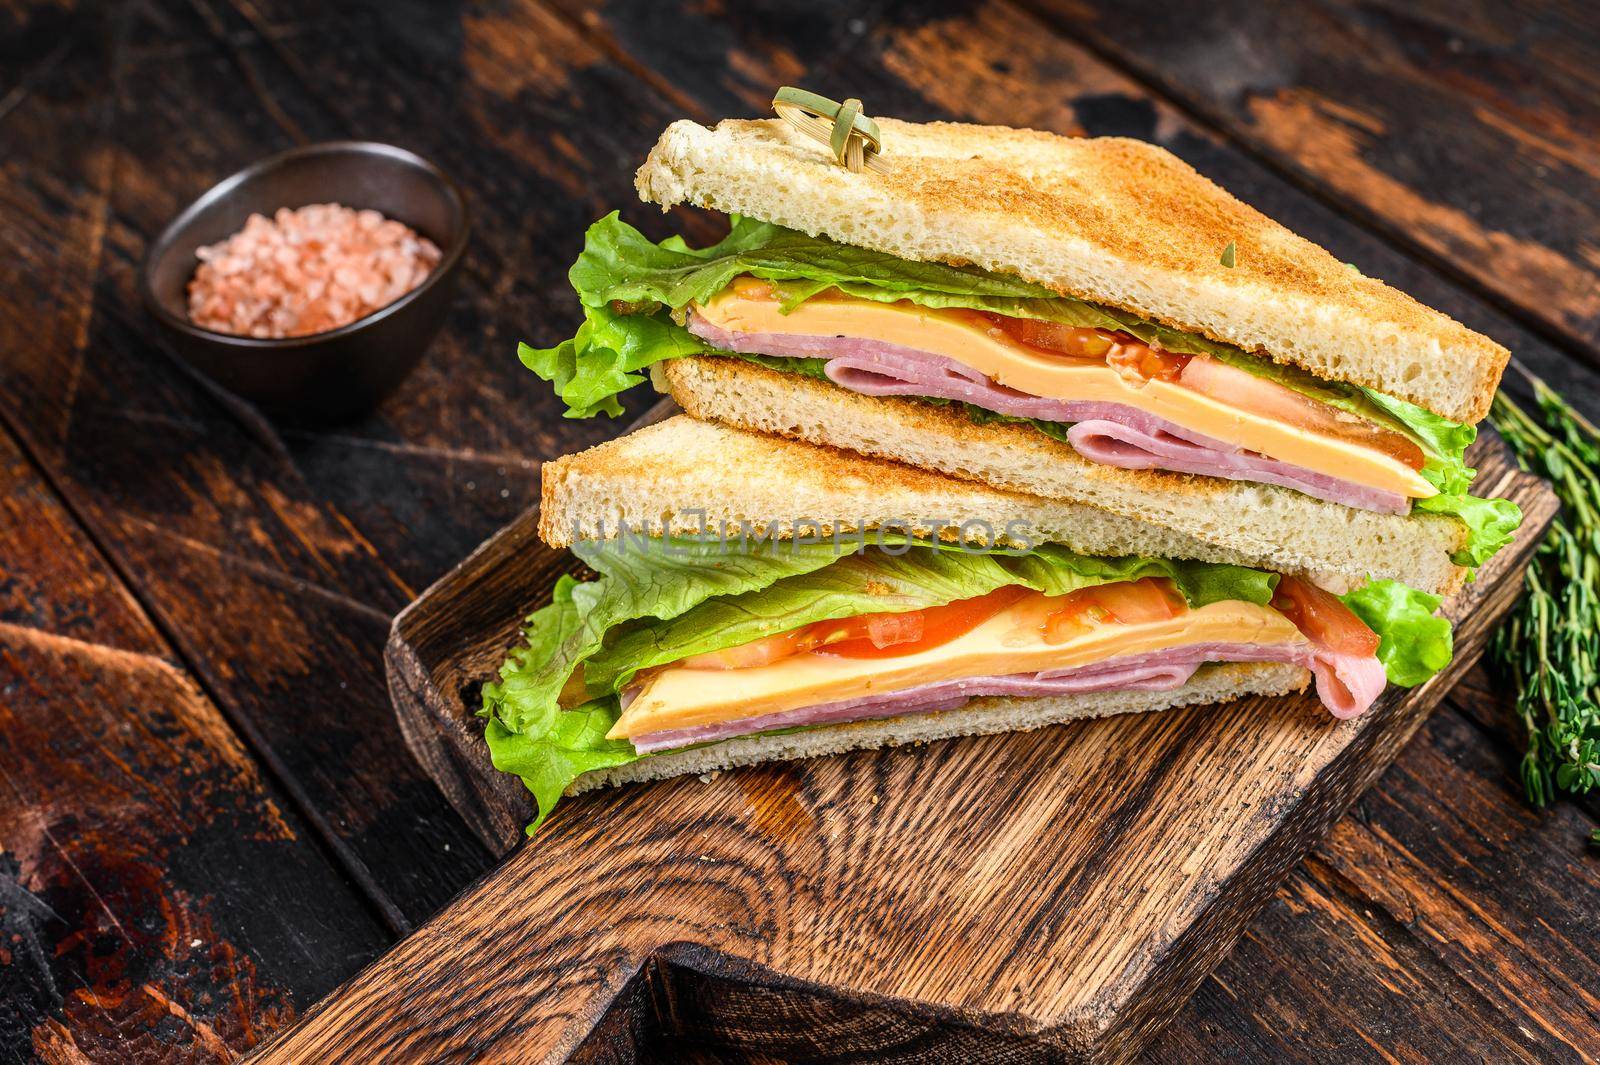 Turkey Ham Club sandwiches with cheese, tomatoes and lettuce on a wooden cutting board. Dark wooden background. Top view.